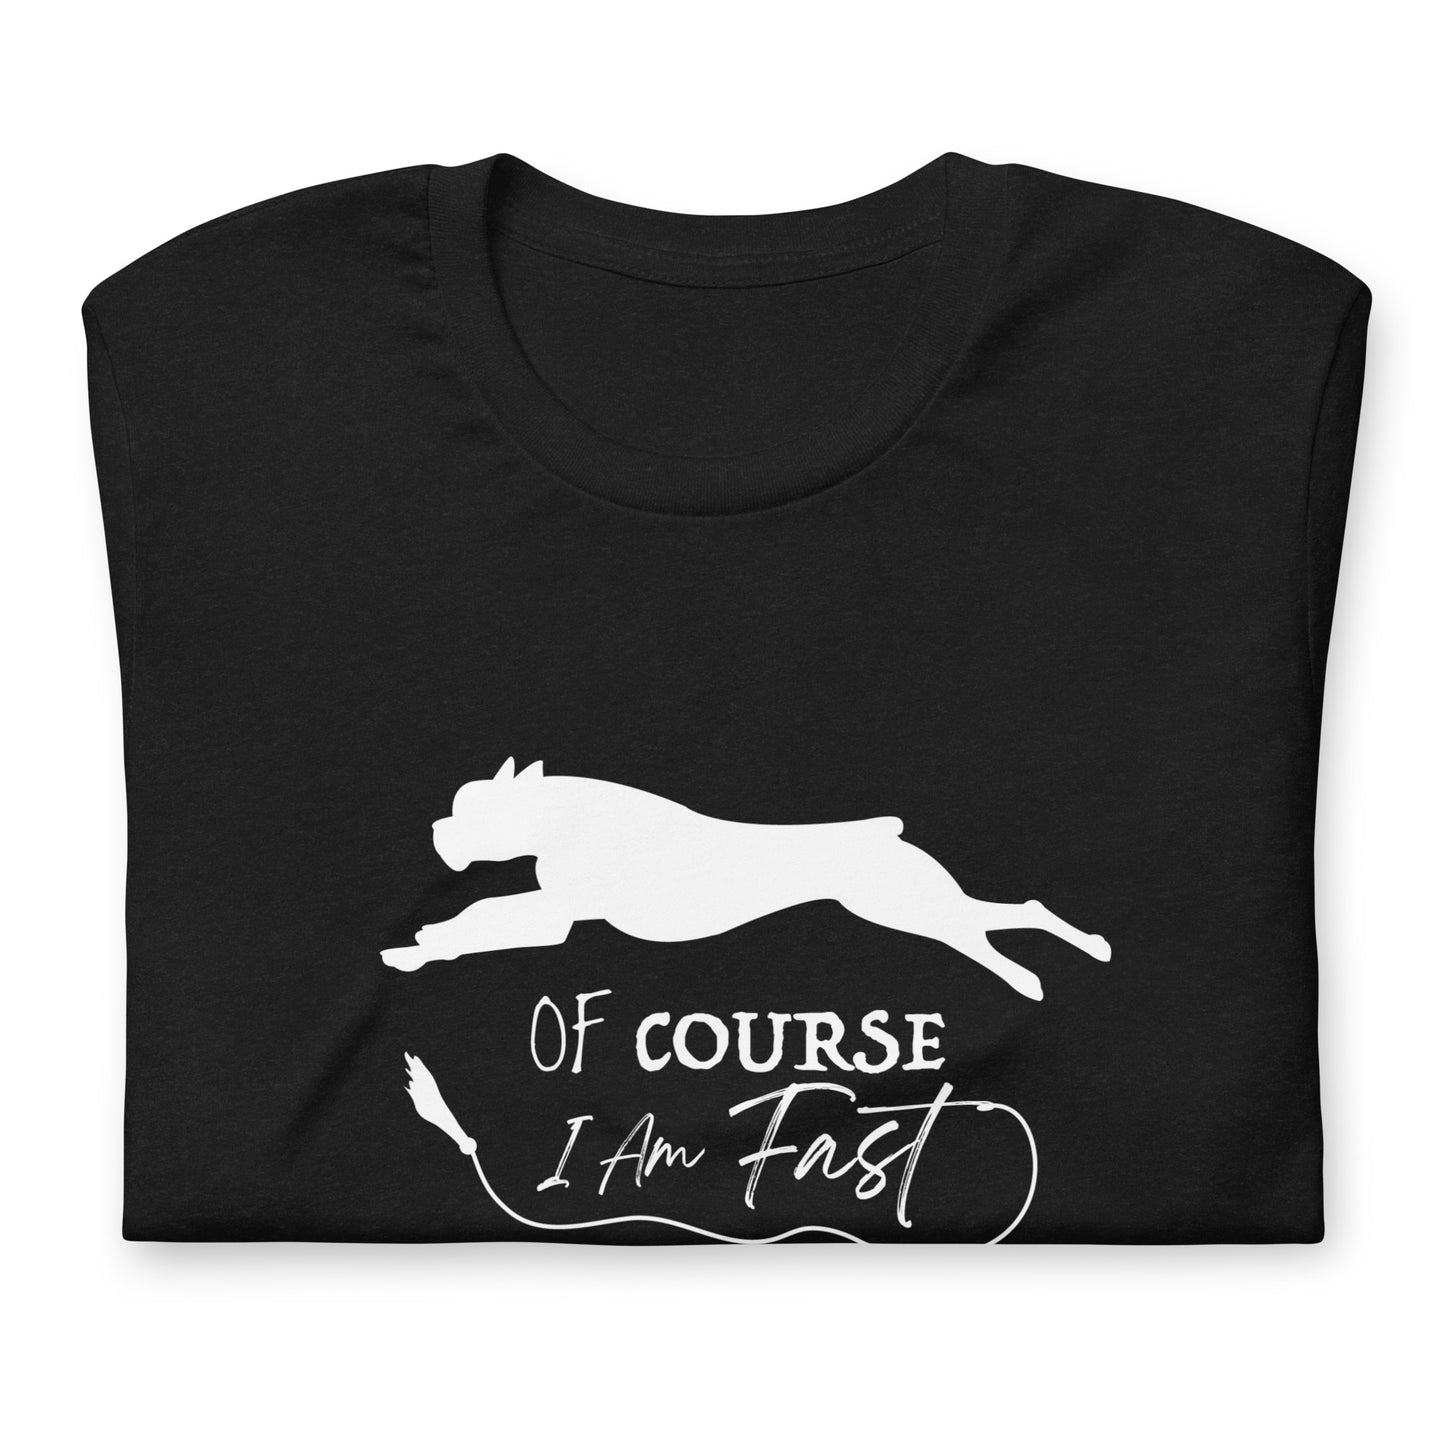 OF COURSE FAST - BOXER - Unisex t-shirt